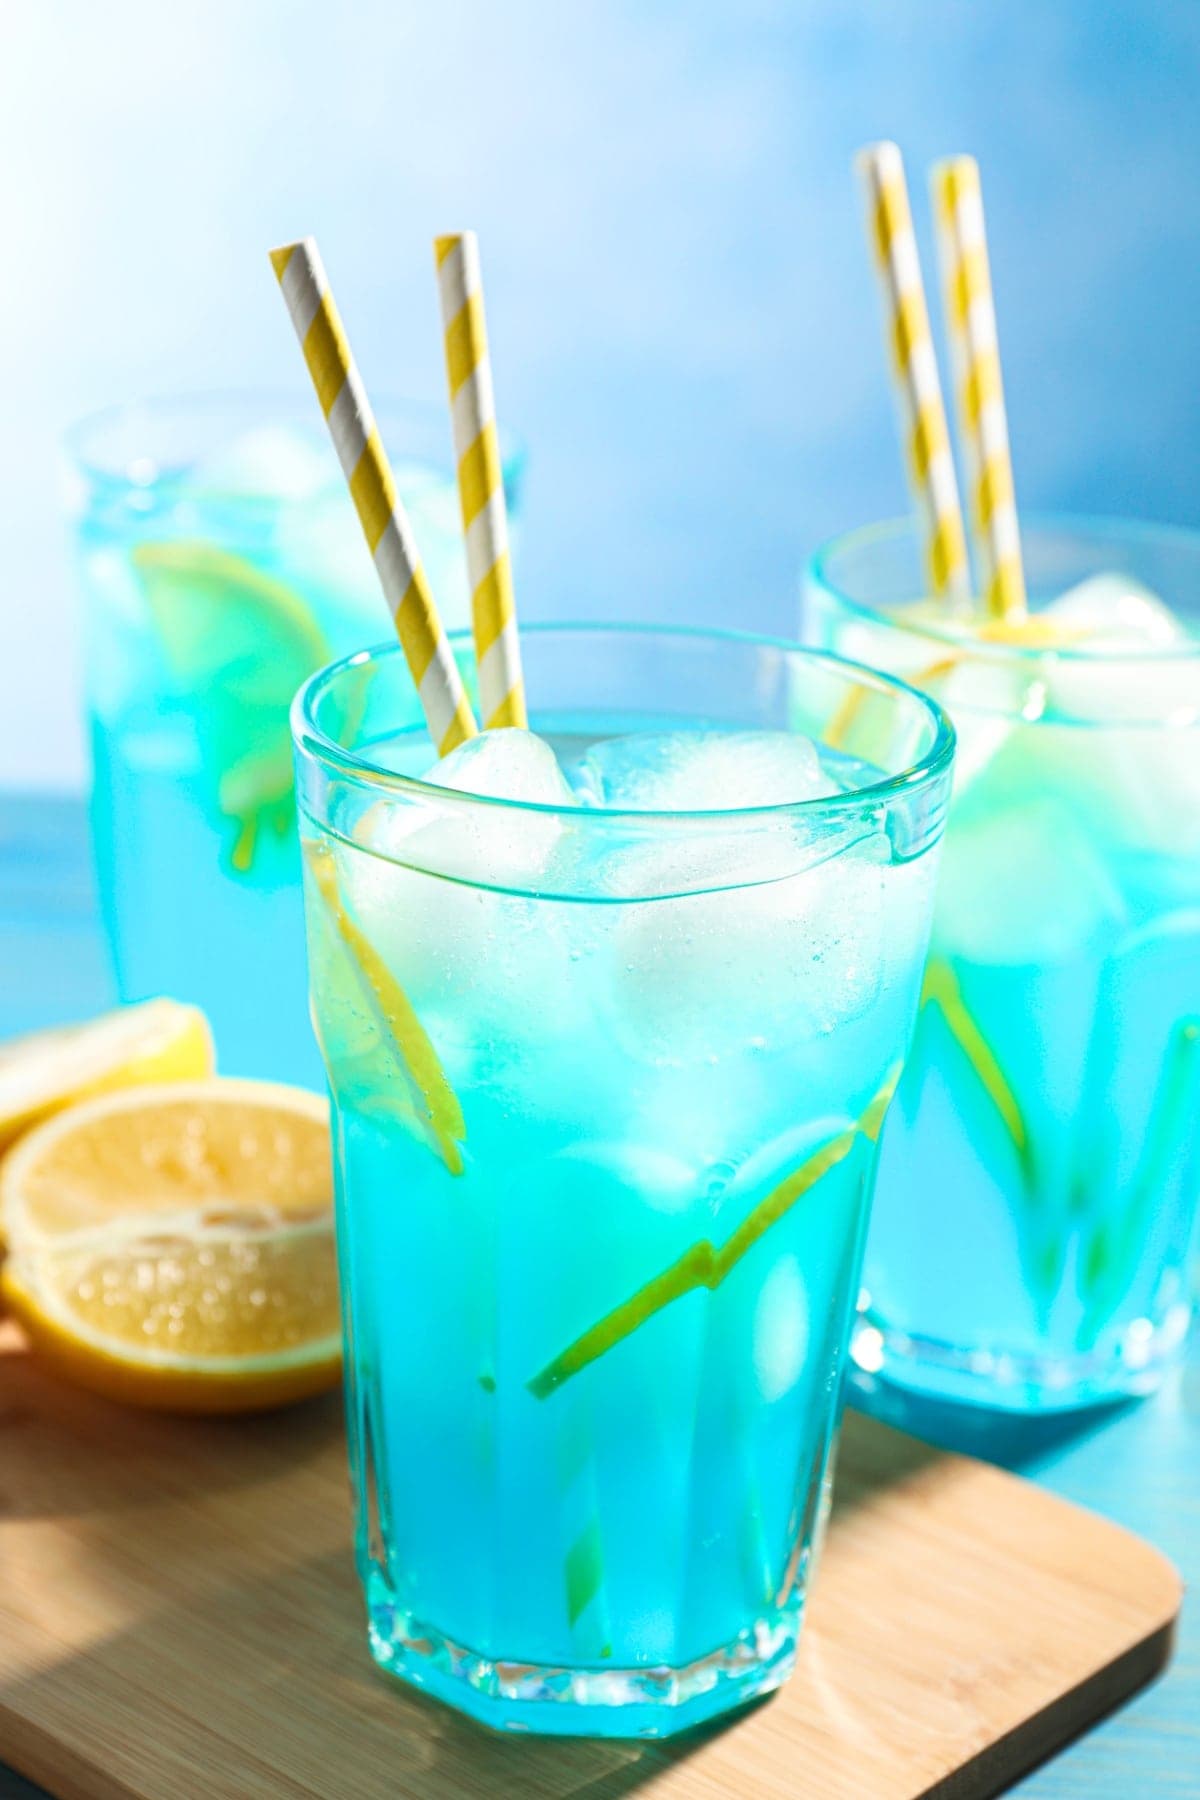 Icy Blue Lagoon Cocktails in highball glasses with yellow striped straws